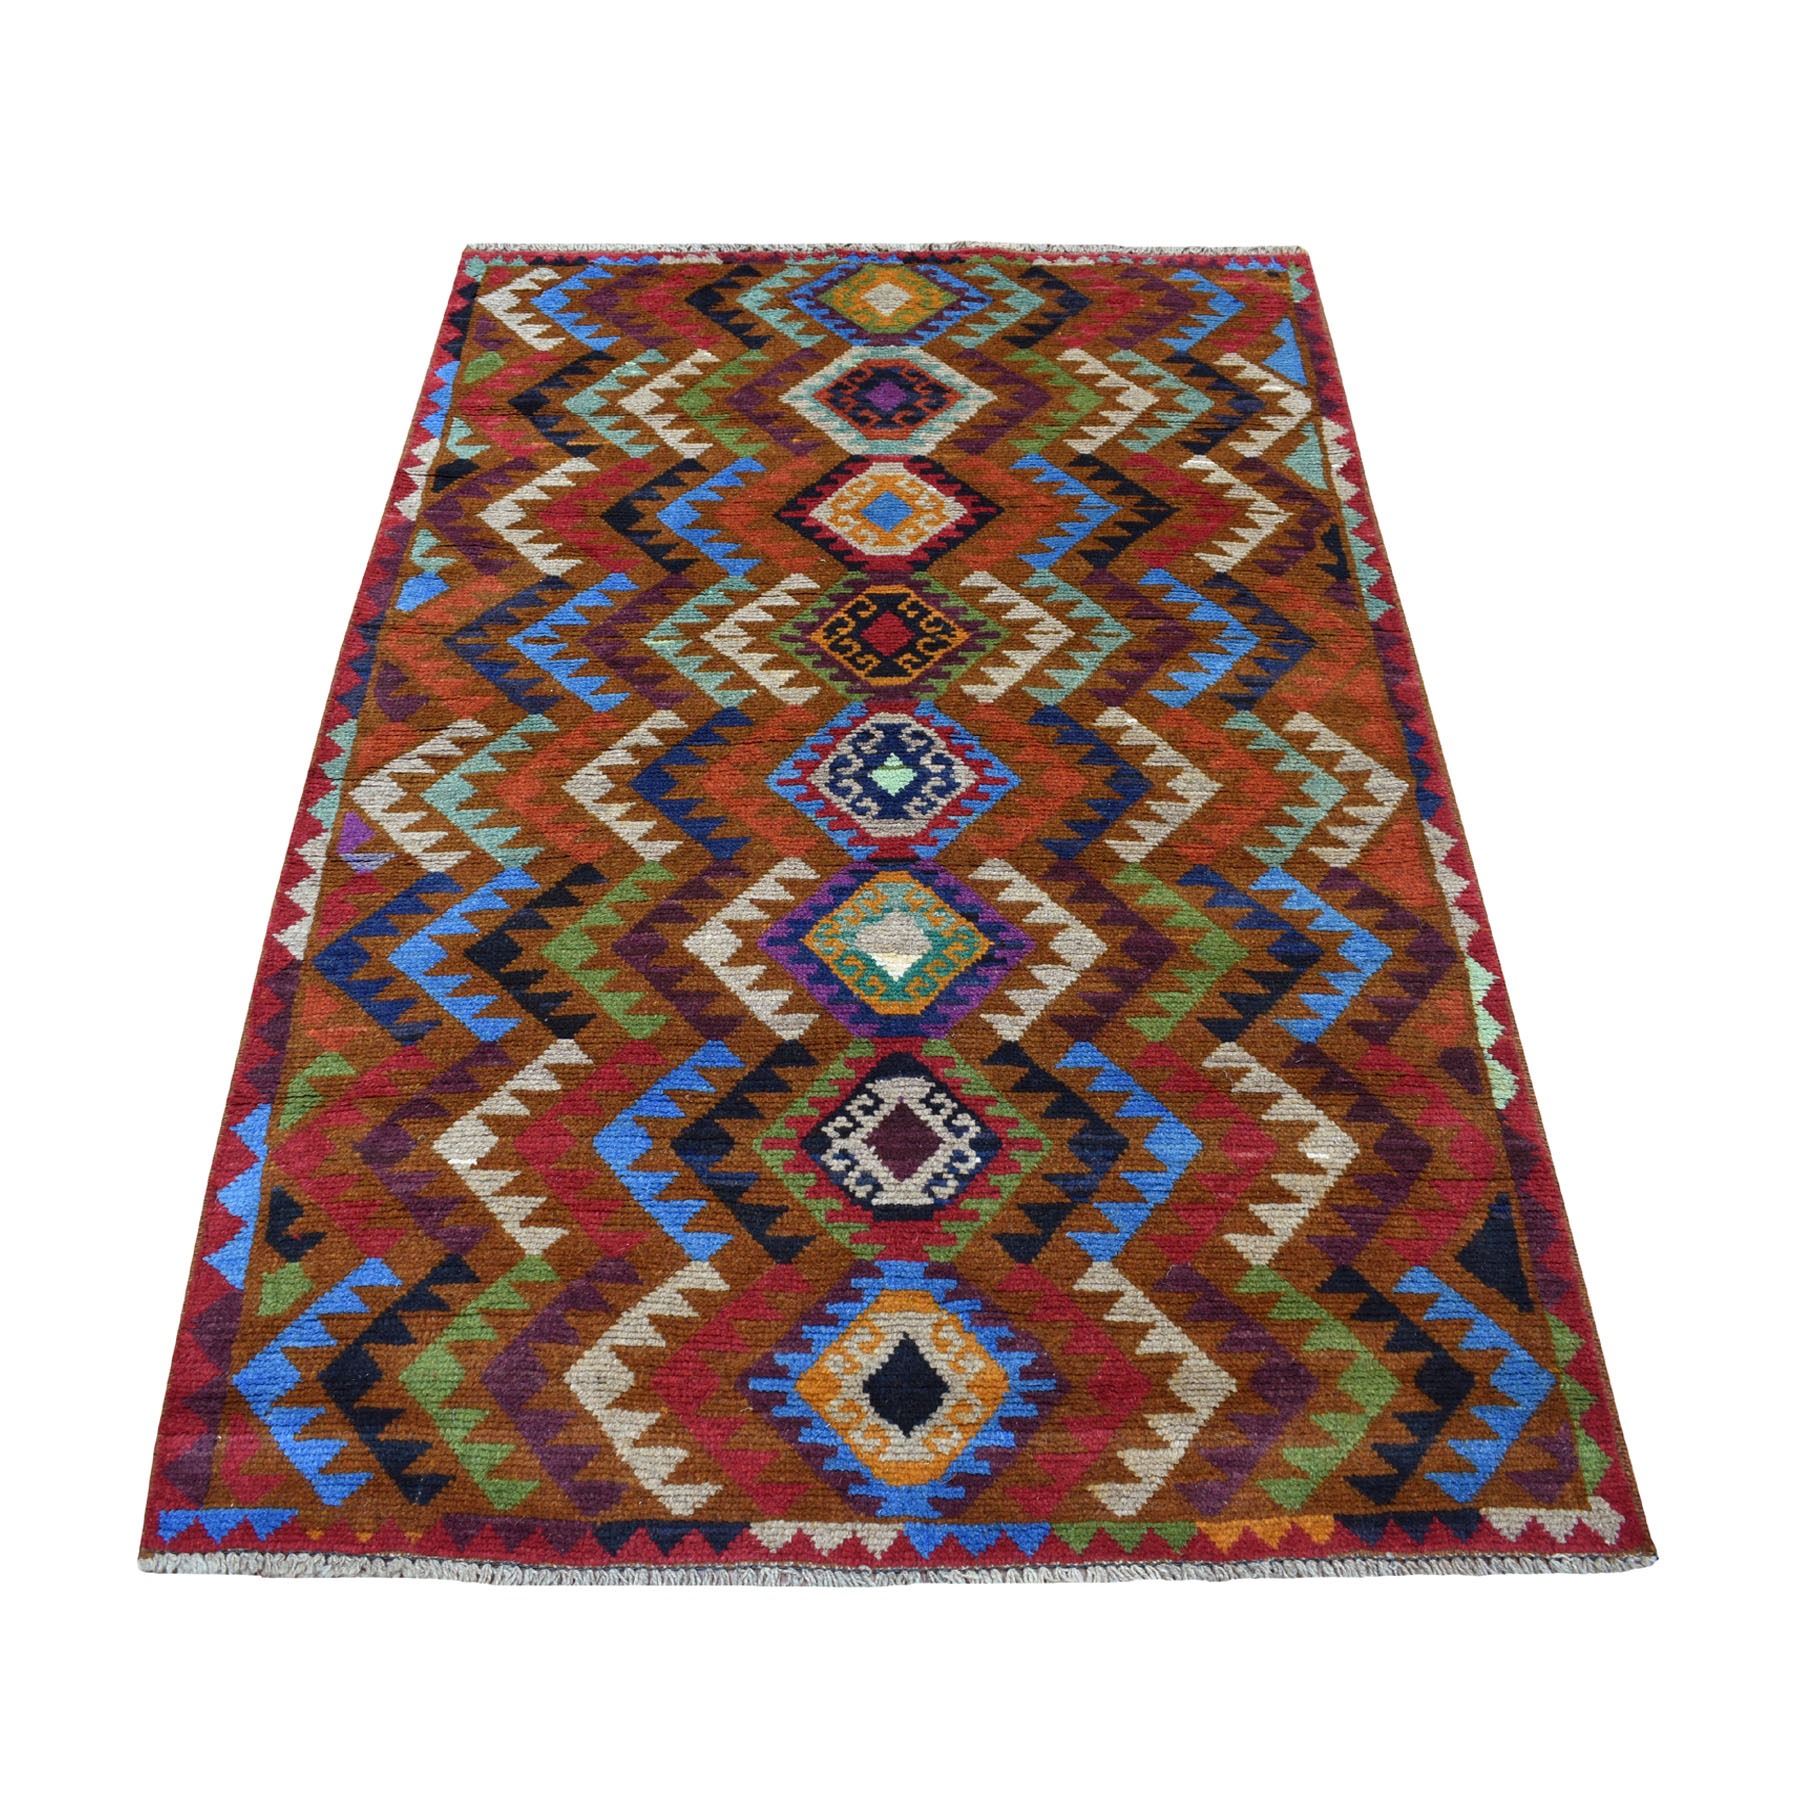 3'9"x6' Brown Hand Woven Colorful Afghan Baluch Geometric Design Pure Wool Oriental Rug 